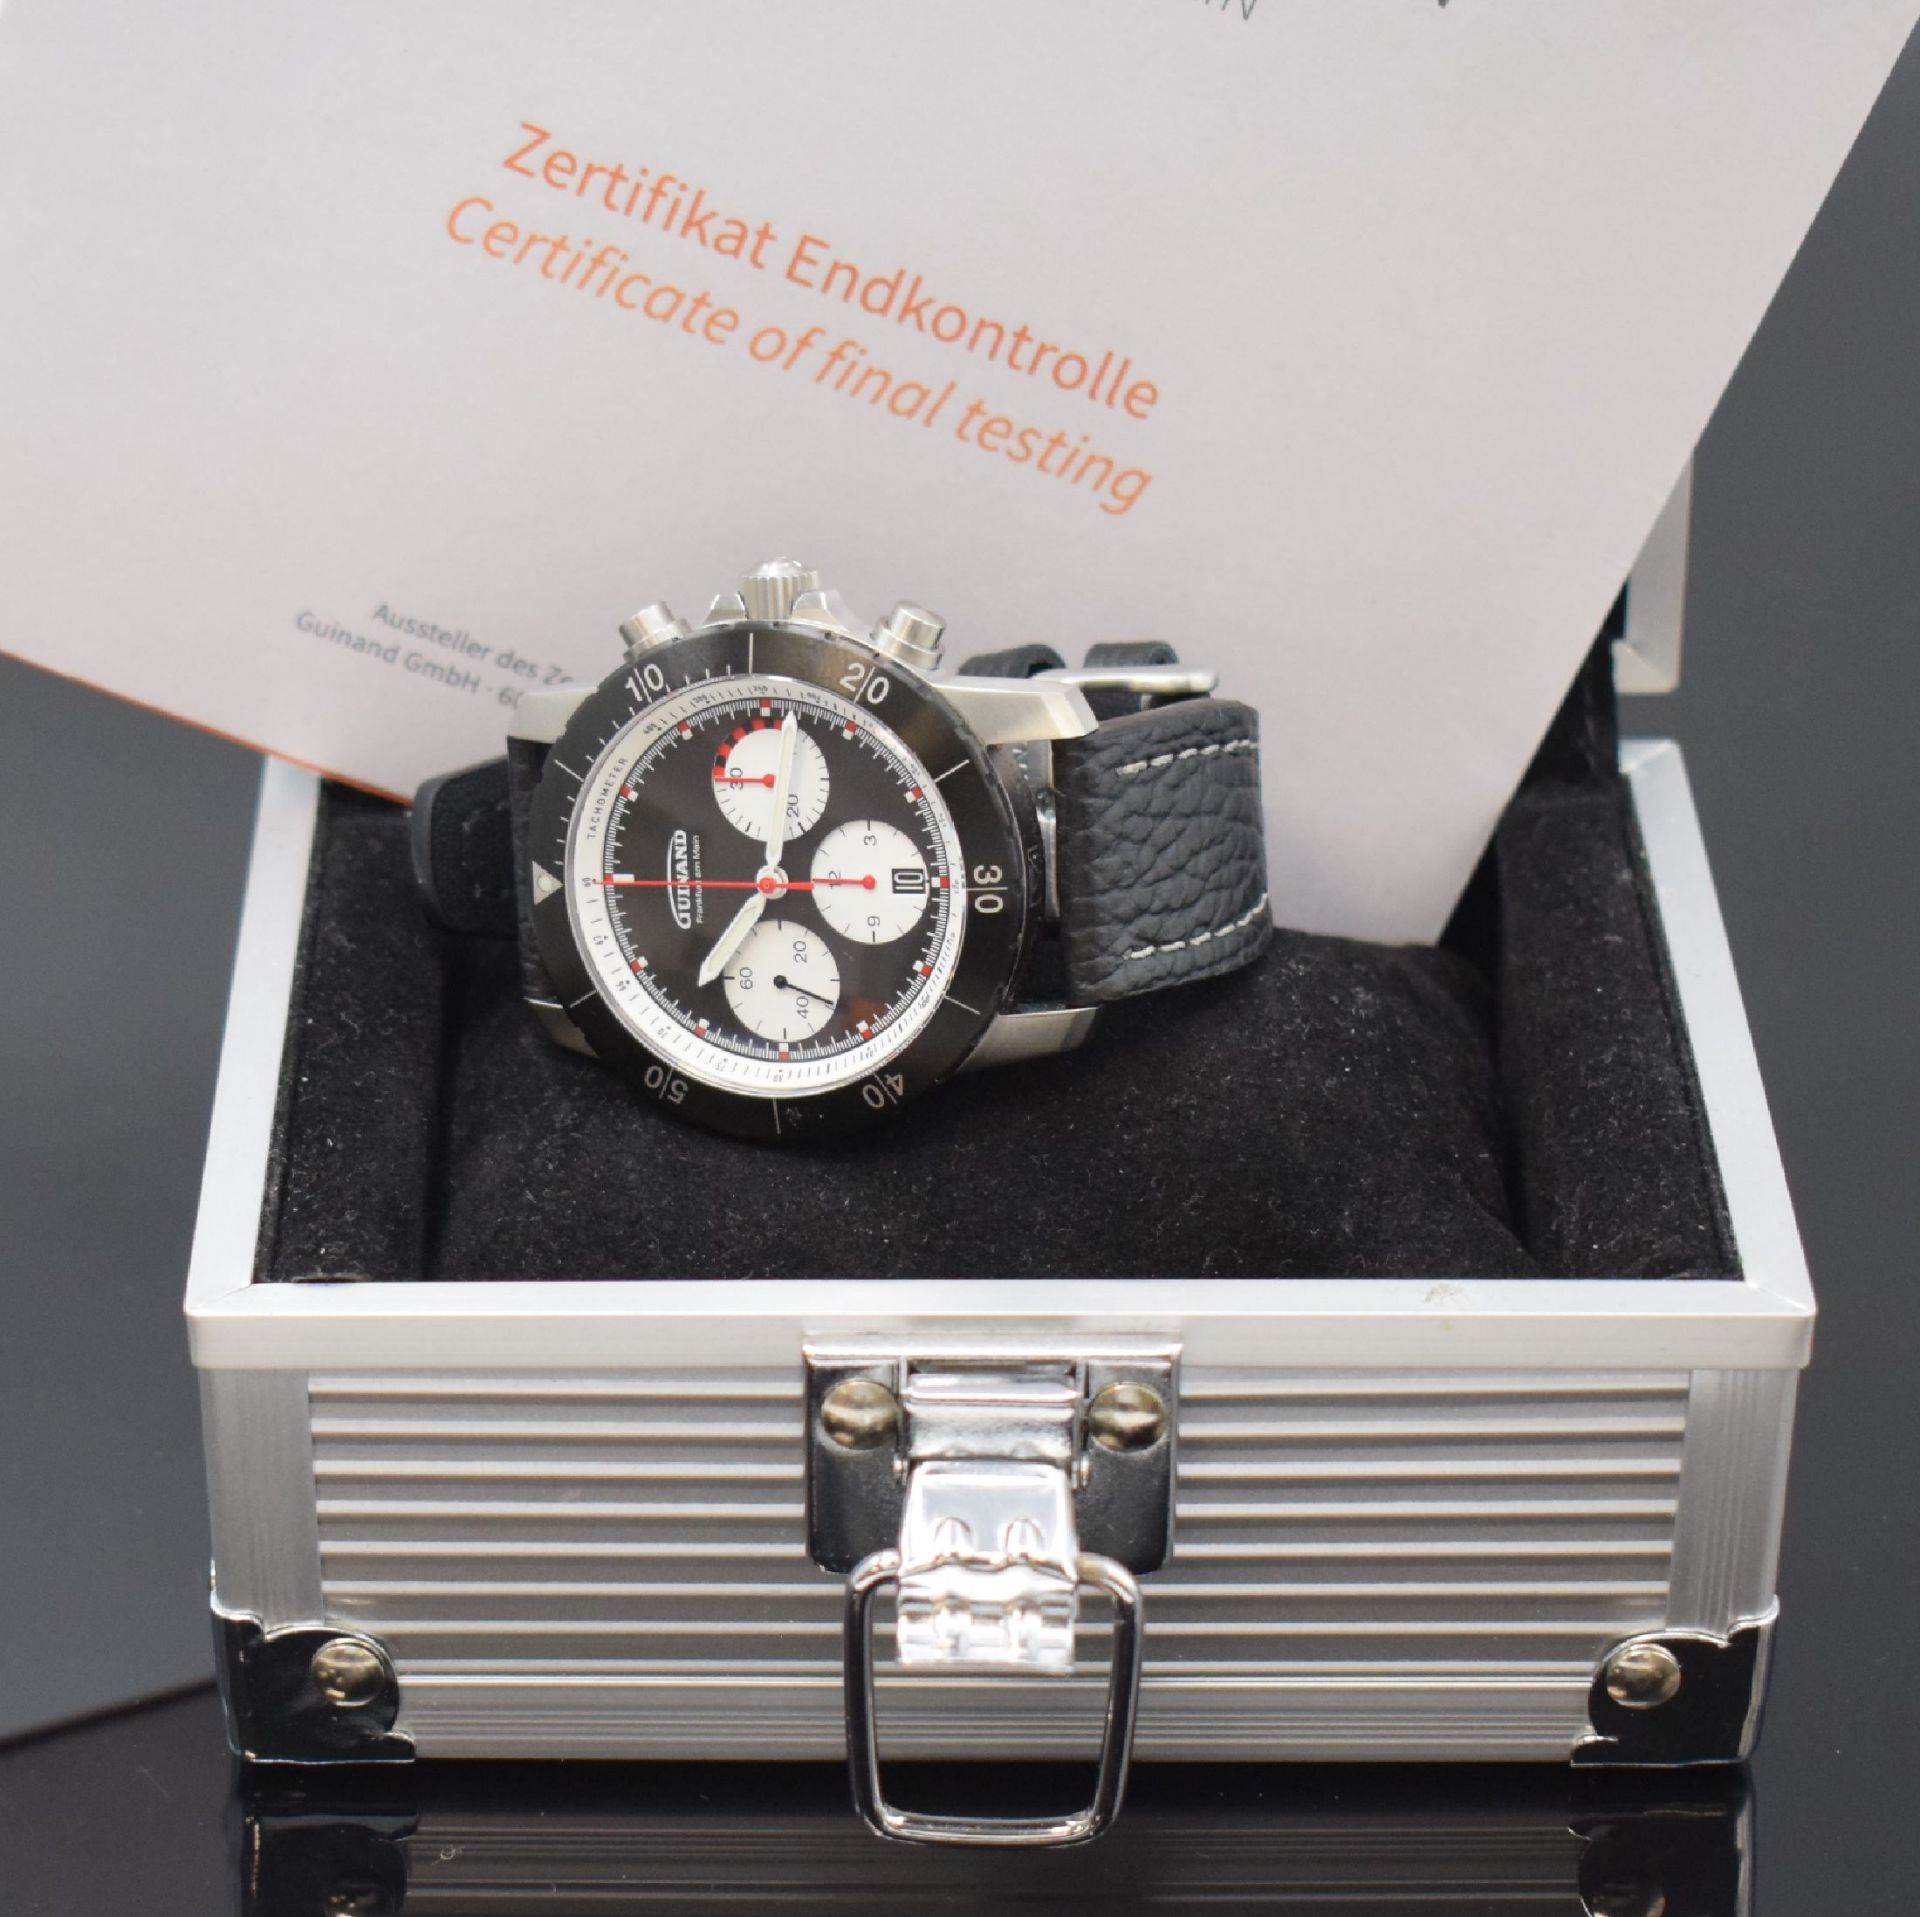 GUINAND Jubiläums-Armbandchronograph in Stahl, Automatik, - Image 7 of 8